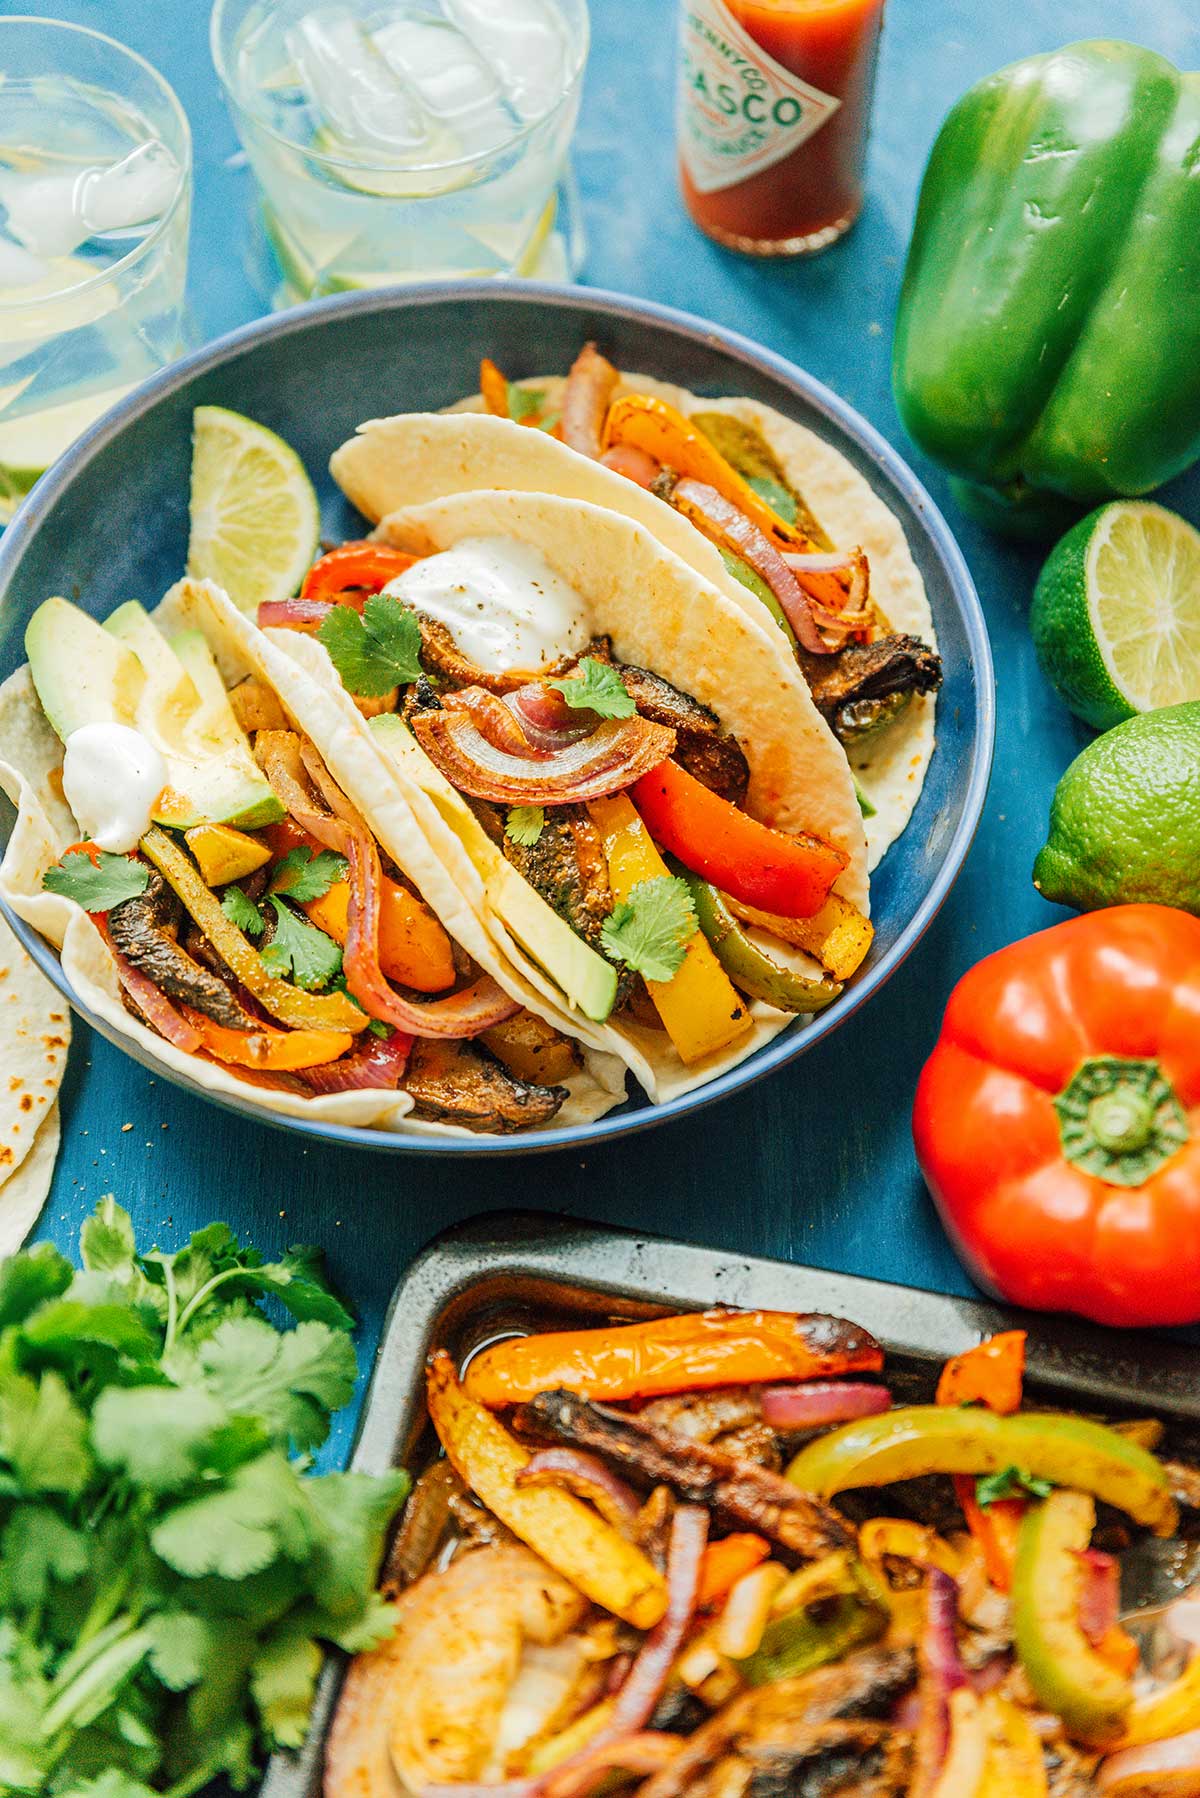 A blue plate filled with 3 veggie fajitas and surrounded by various fajita ingredients